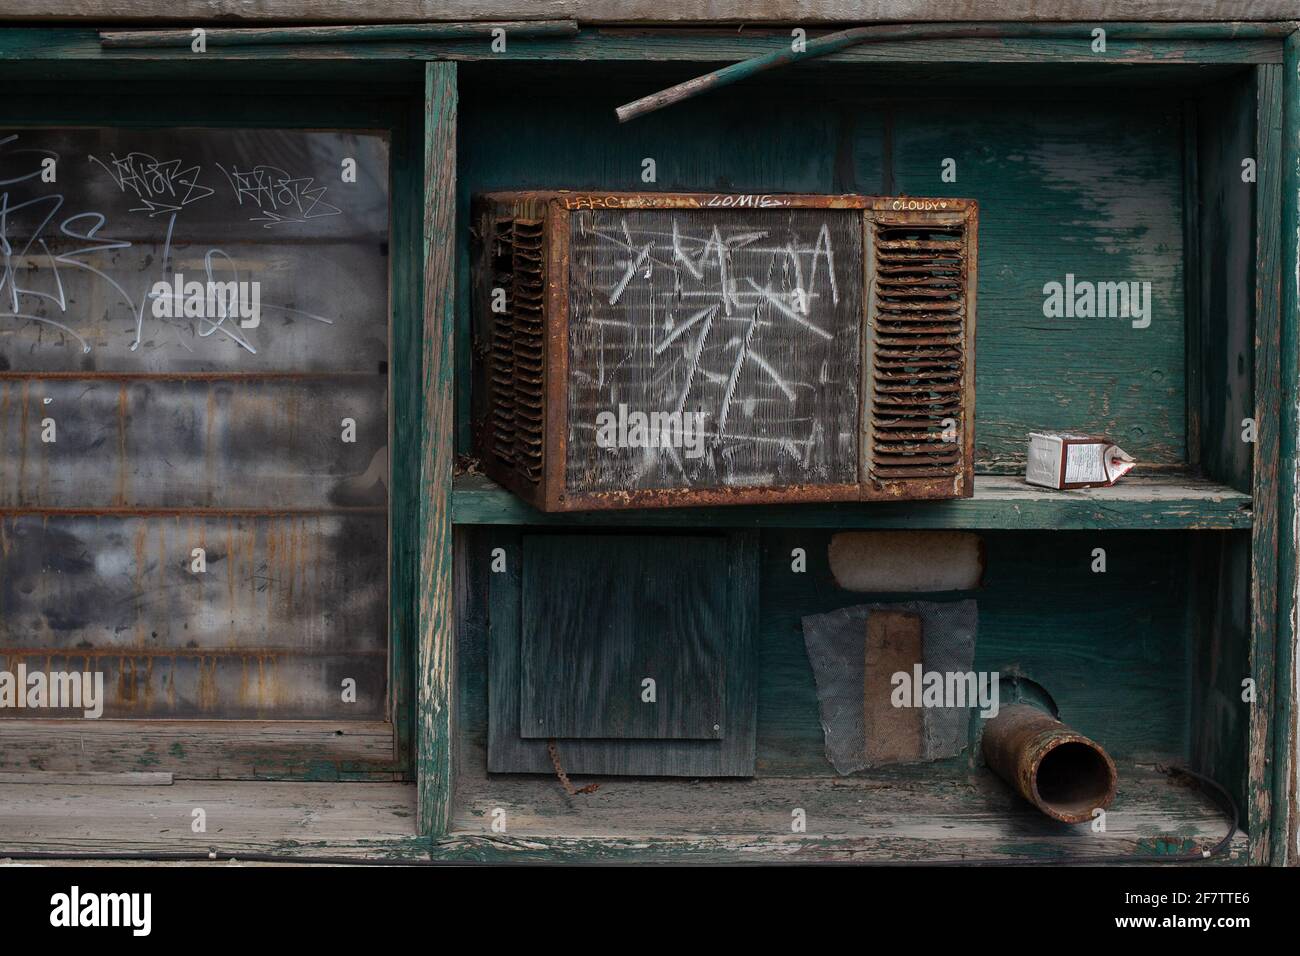 Rusty, old air conditioner unit on broken down, teal shelf. Stock Photo